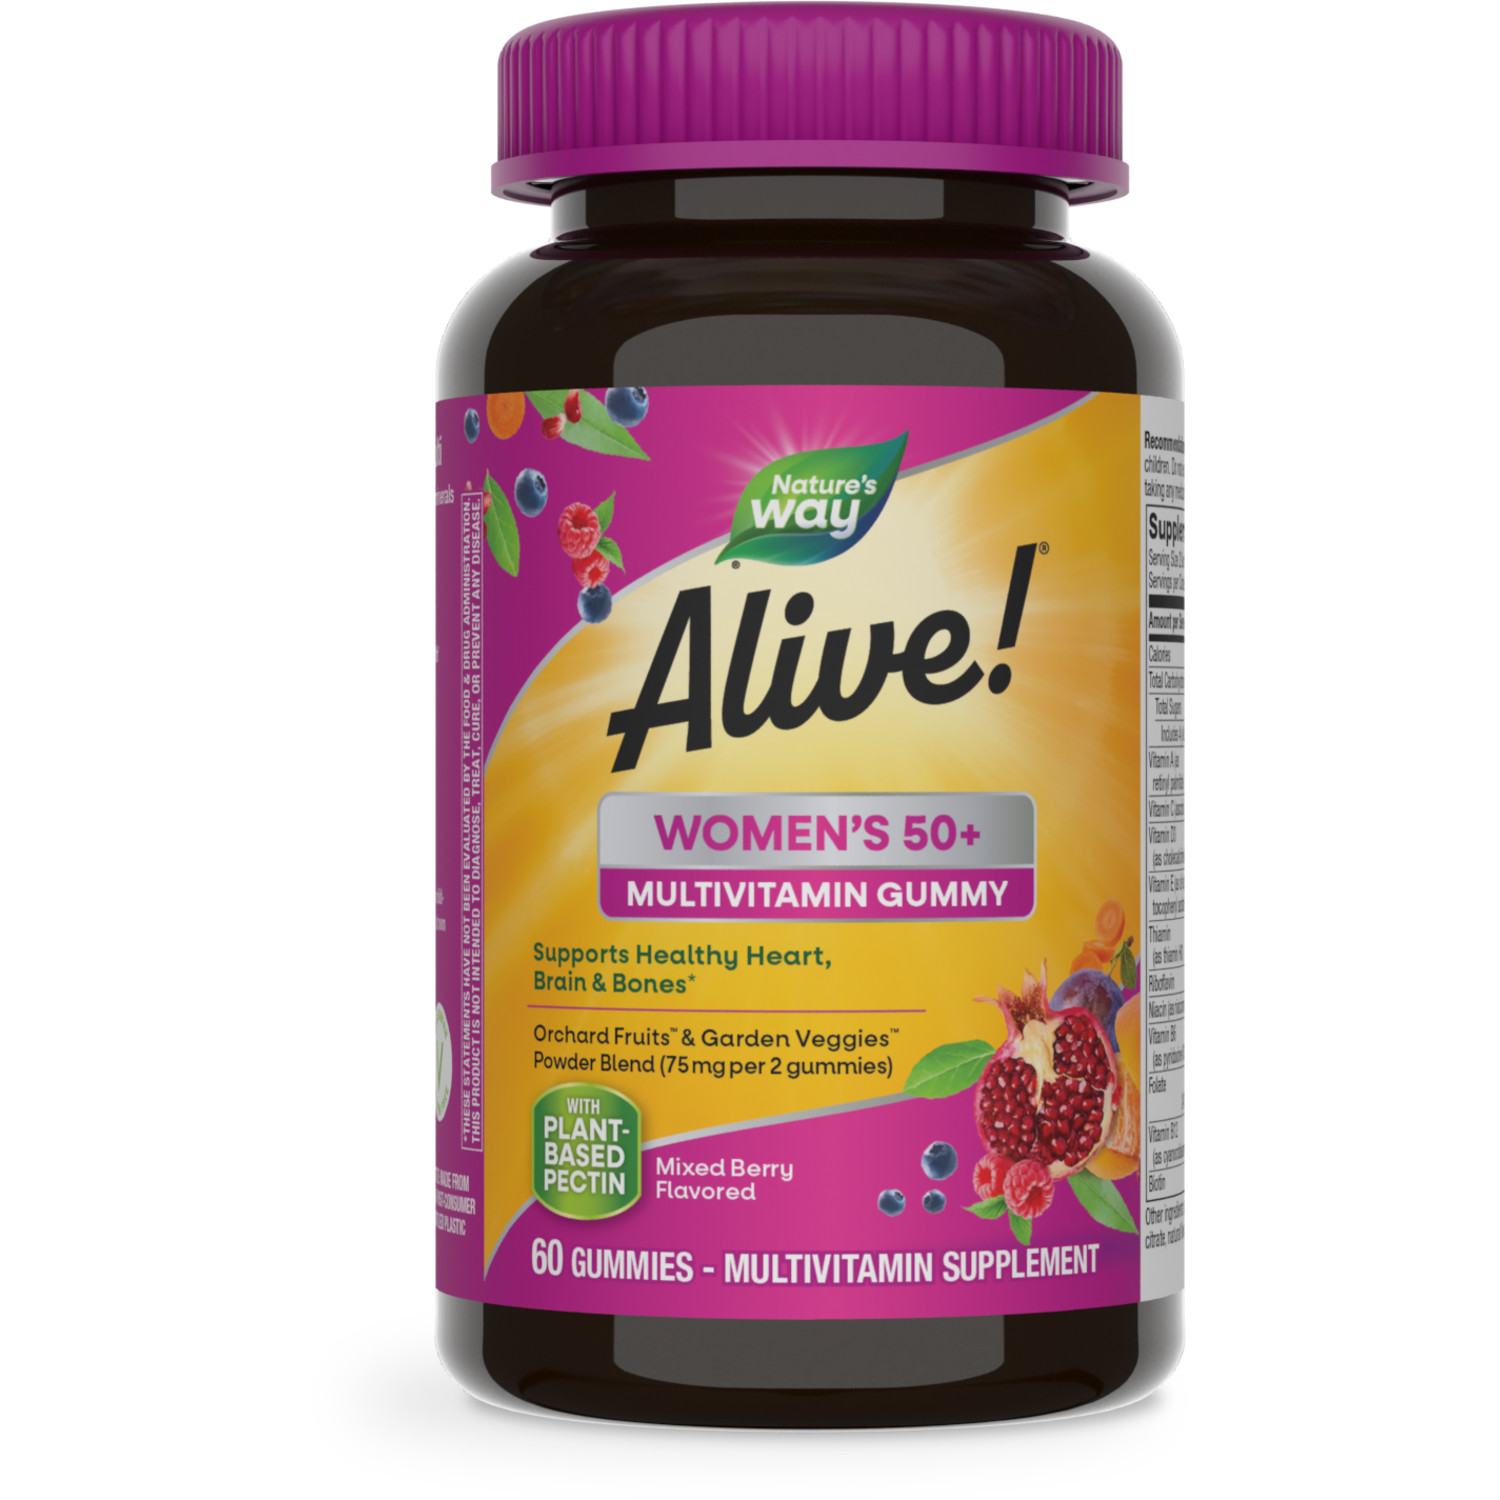 Nature's Way Alive! Women's 50+ Gummy Multivitamin, B-Vitamins, Mixed Berry Flavored, 60 Count - image 1 of 9